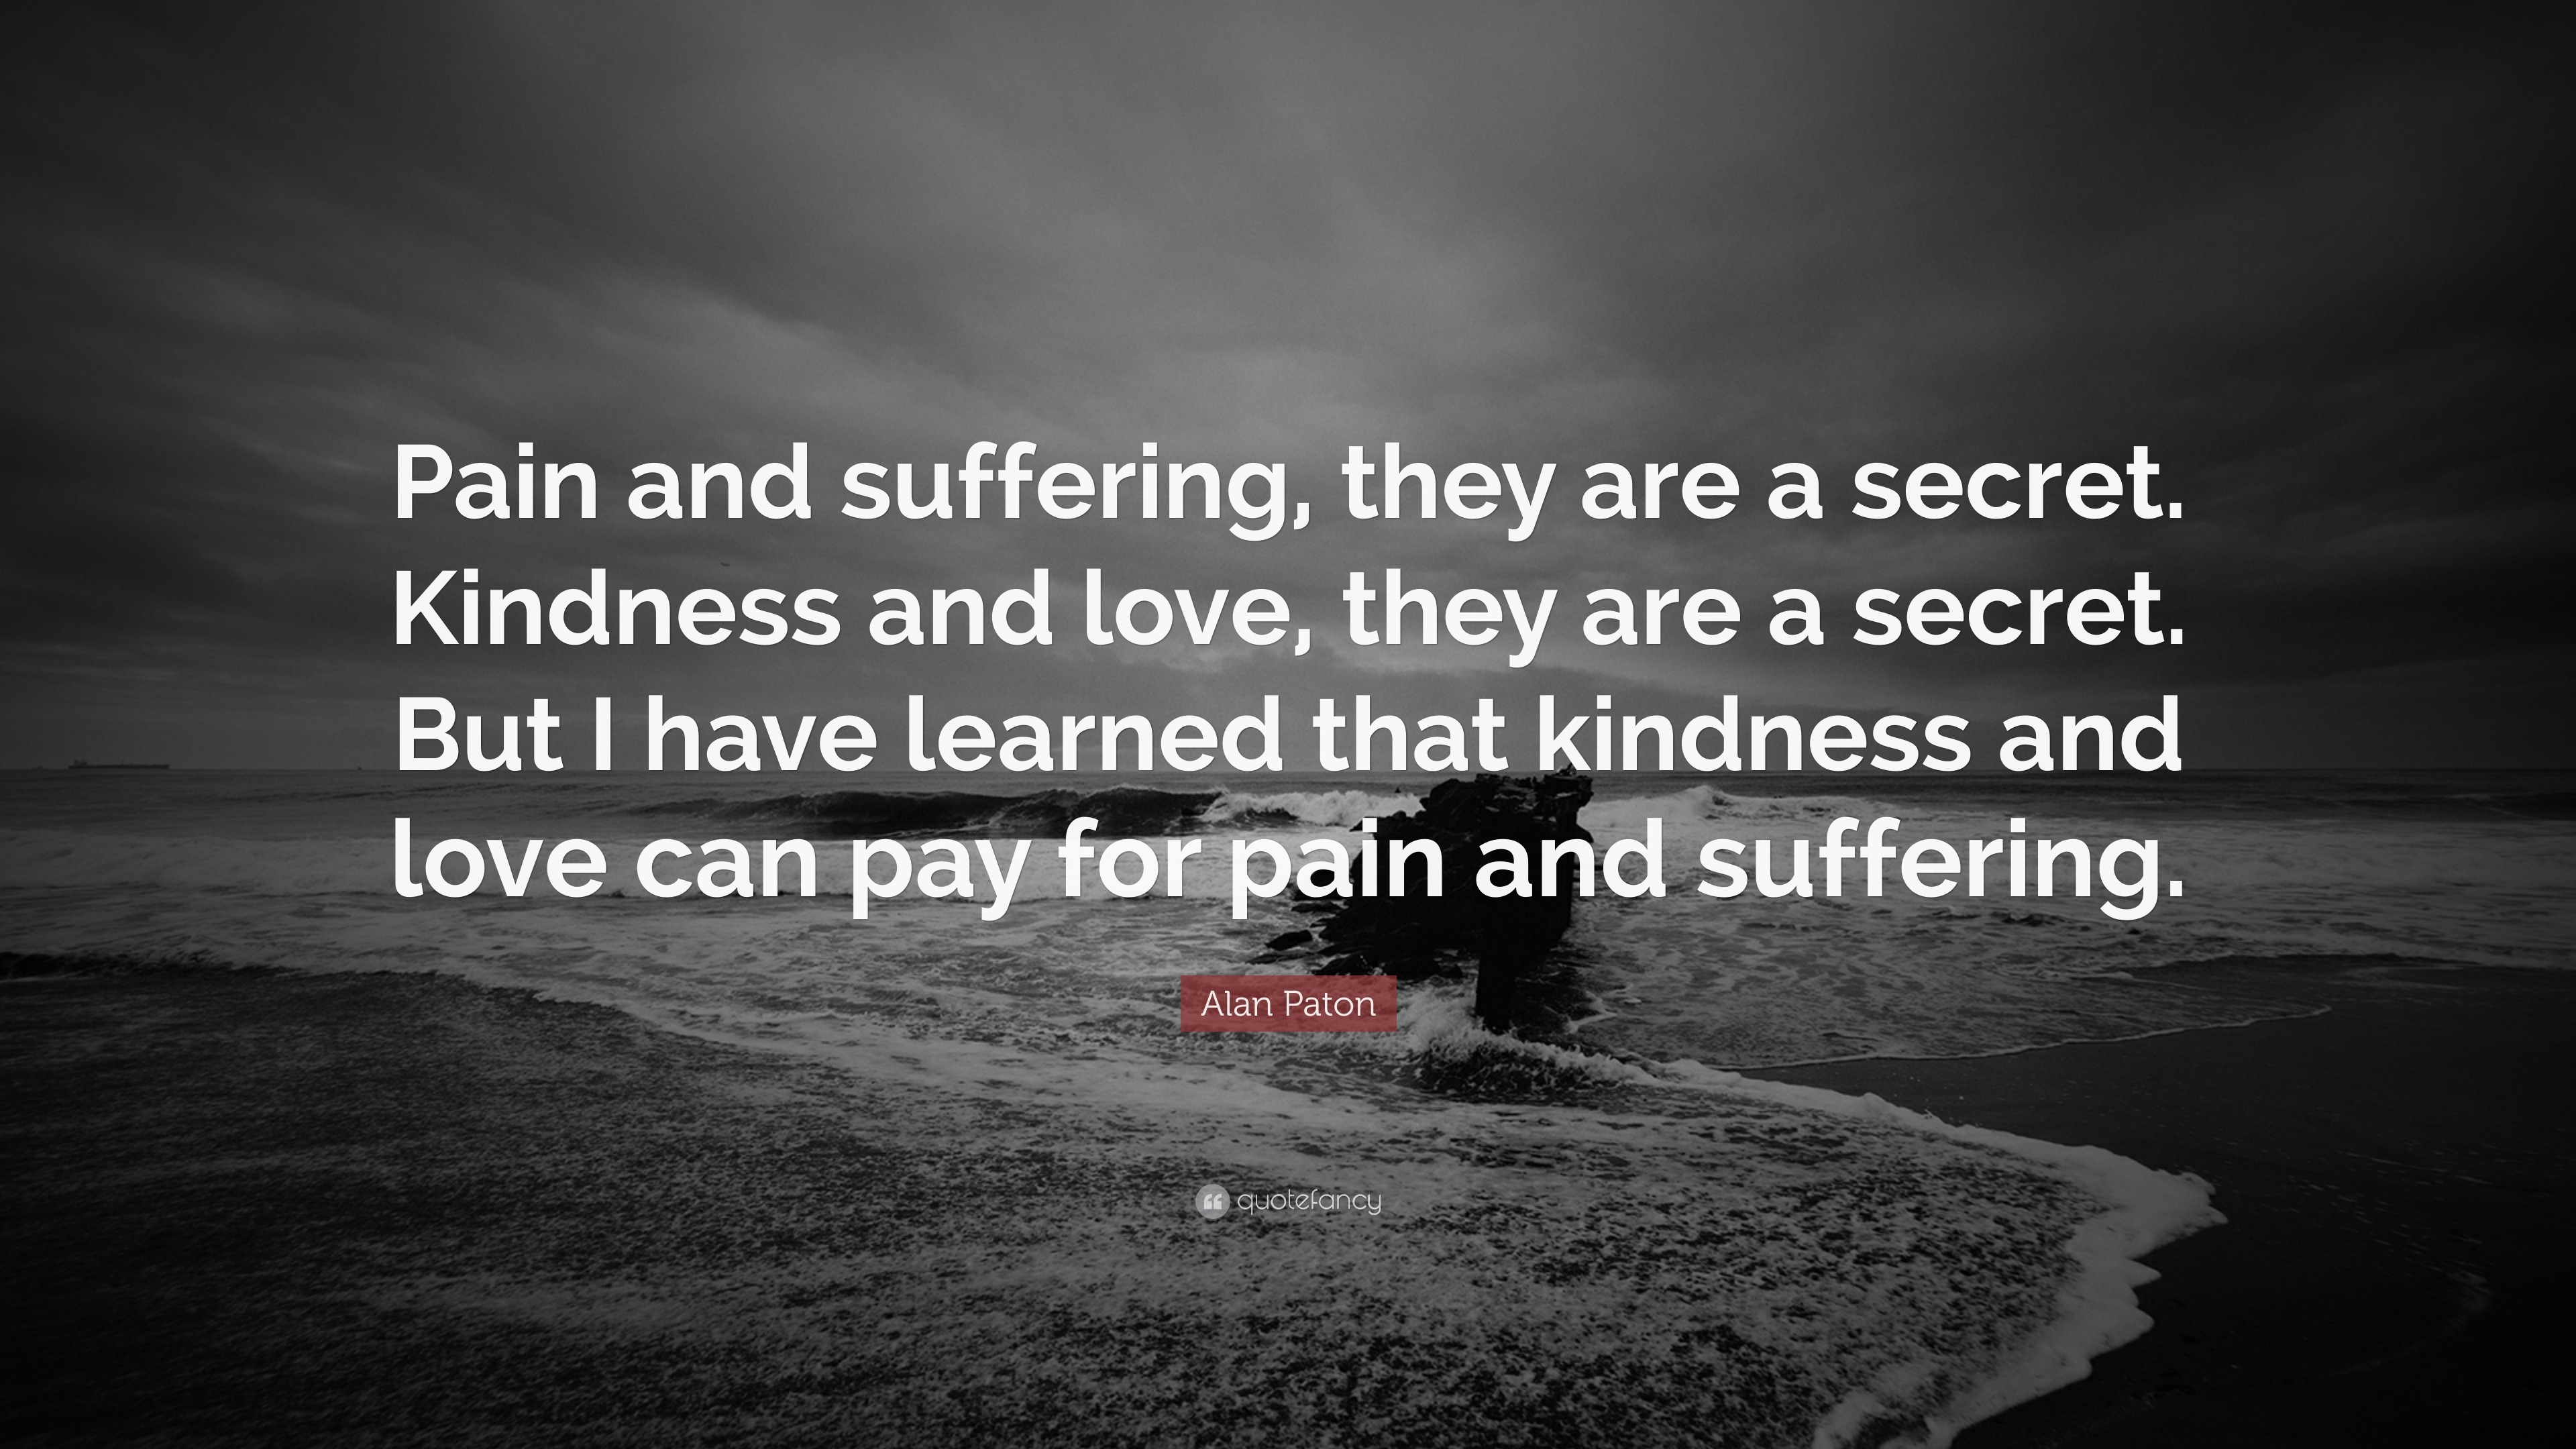 Alan Paton Quote: “Pain and suffering, they are a secret. Kindness and ...